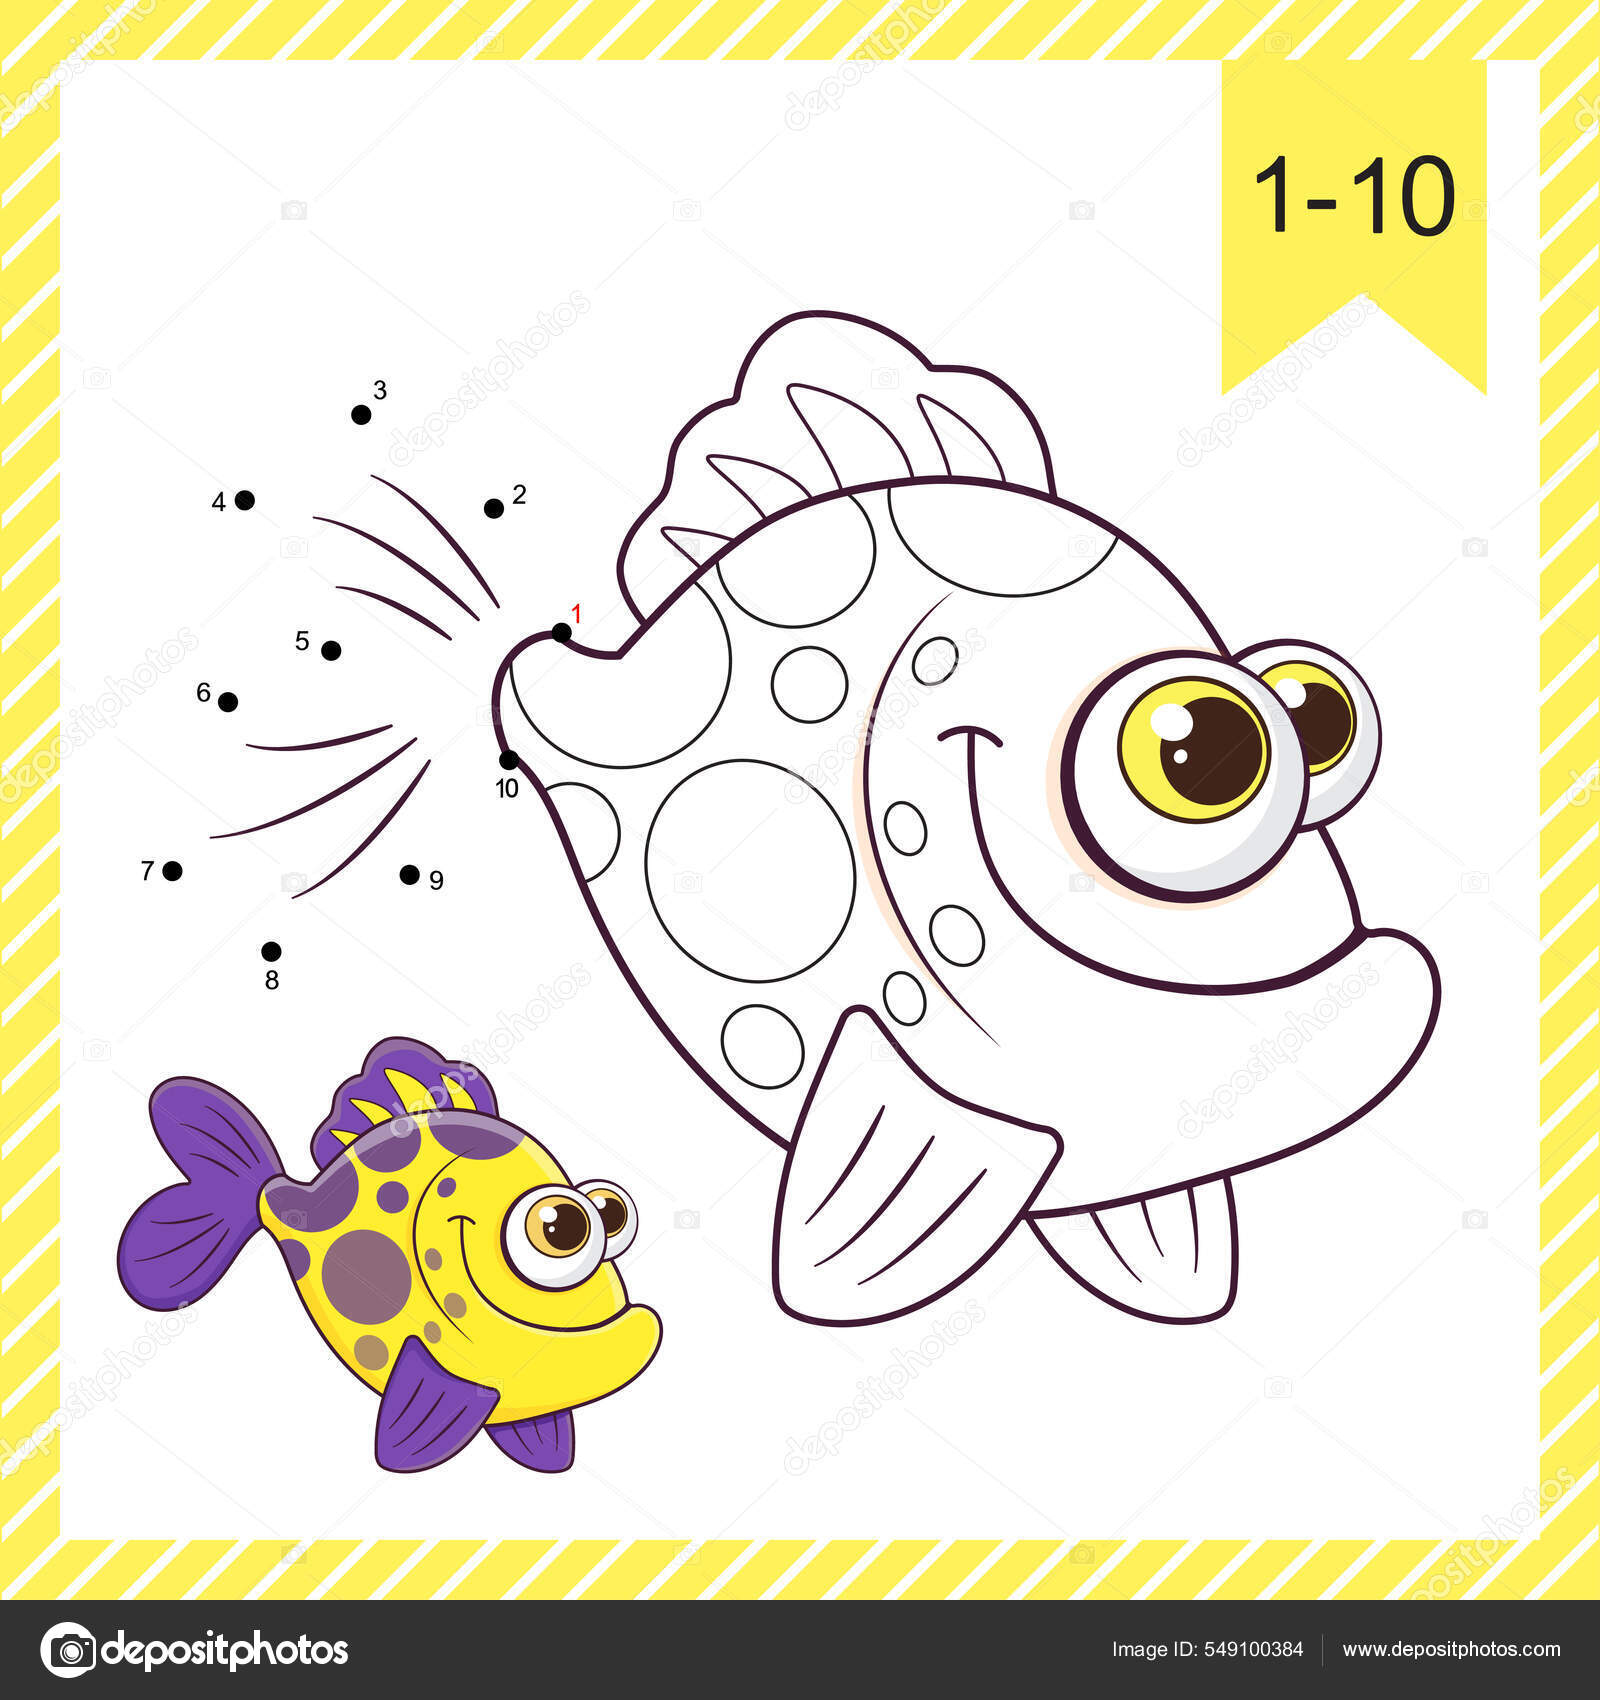 How to Draw a Baby Fish